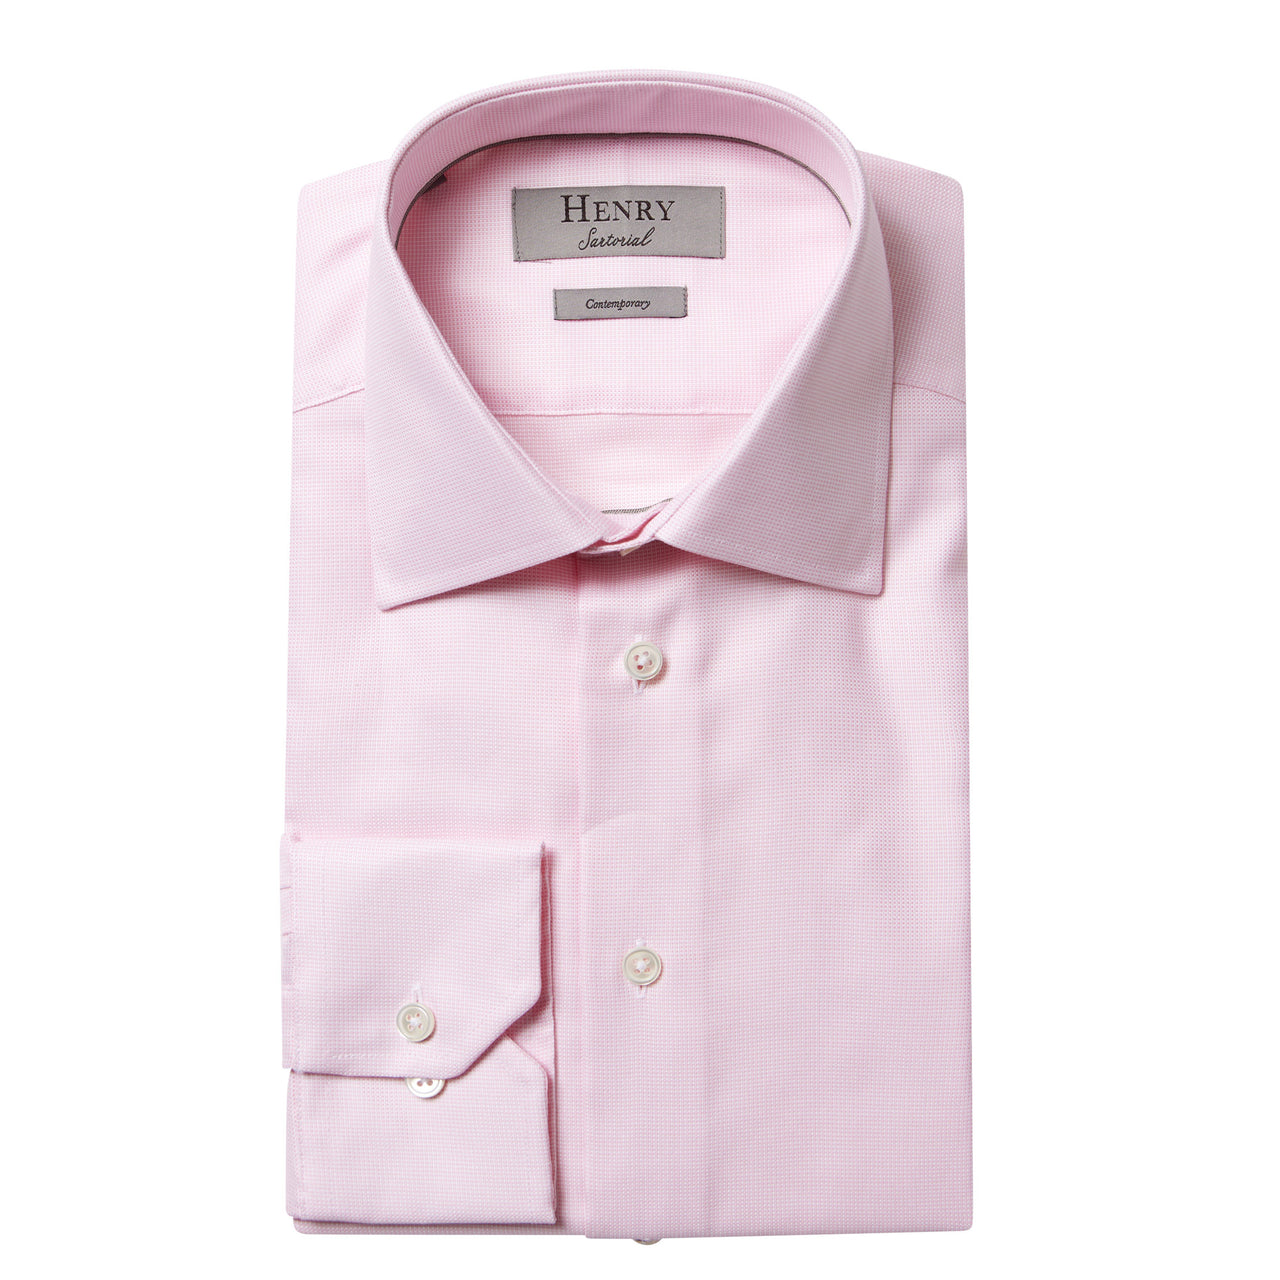 HENRY SARTORIAL Oxford Business Shirt Single Cuff Contemporary Fit PINK/WHITE